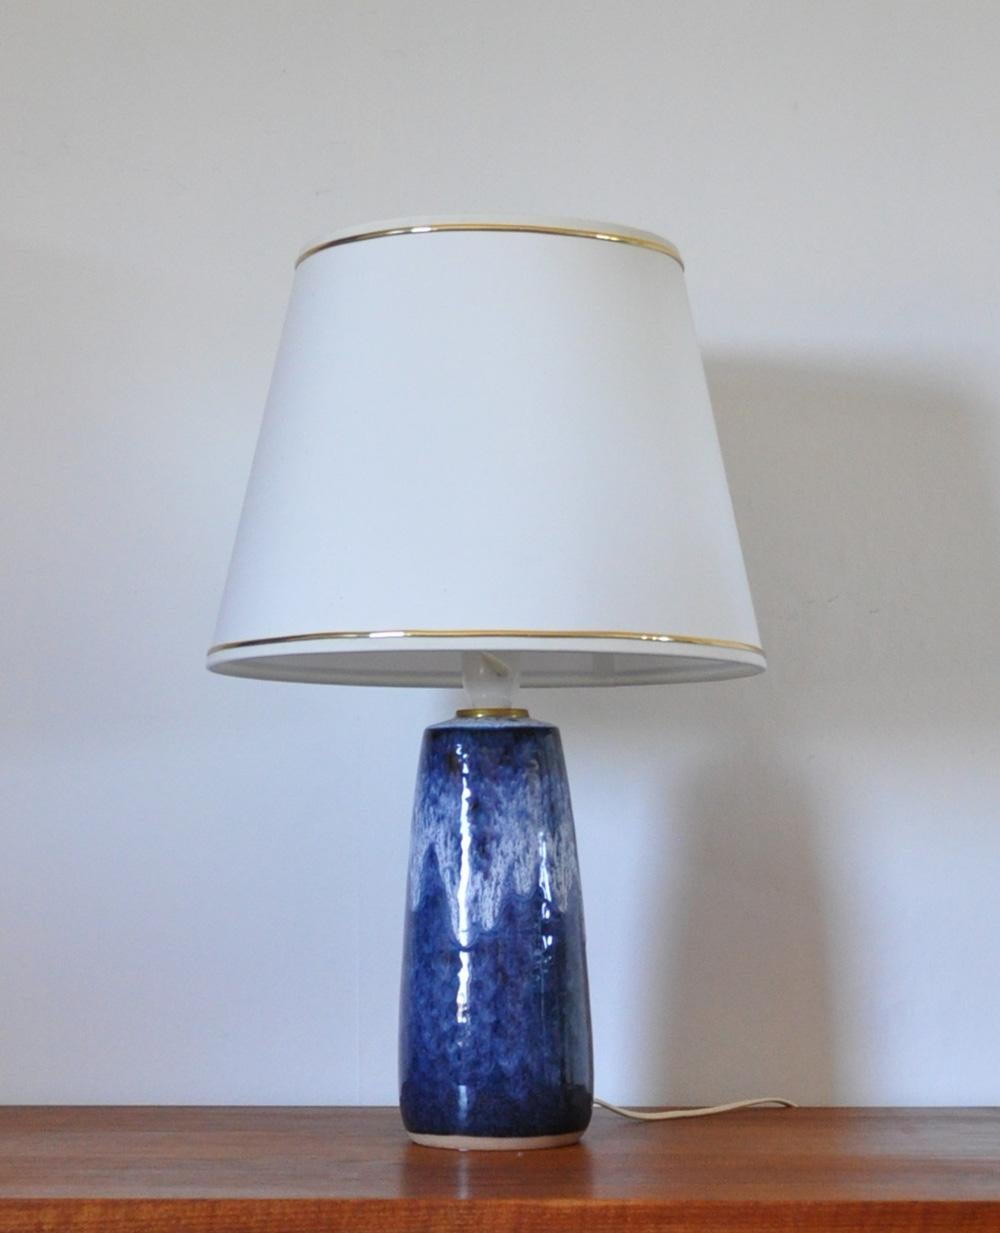 Blue and white glazed Ceramic Table lamp from Valholm, Denmark.
Excellent vintage condition, no chips, no cracks.
Item comes without shade.

Dimensions without shade (W x D x H): 11.5 x 11.5 x 34 cm
Height with shade: 55 cm
Light source: E27 Edison